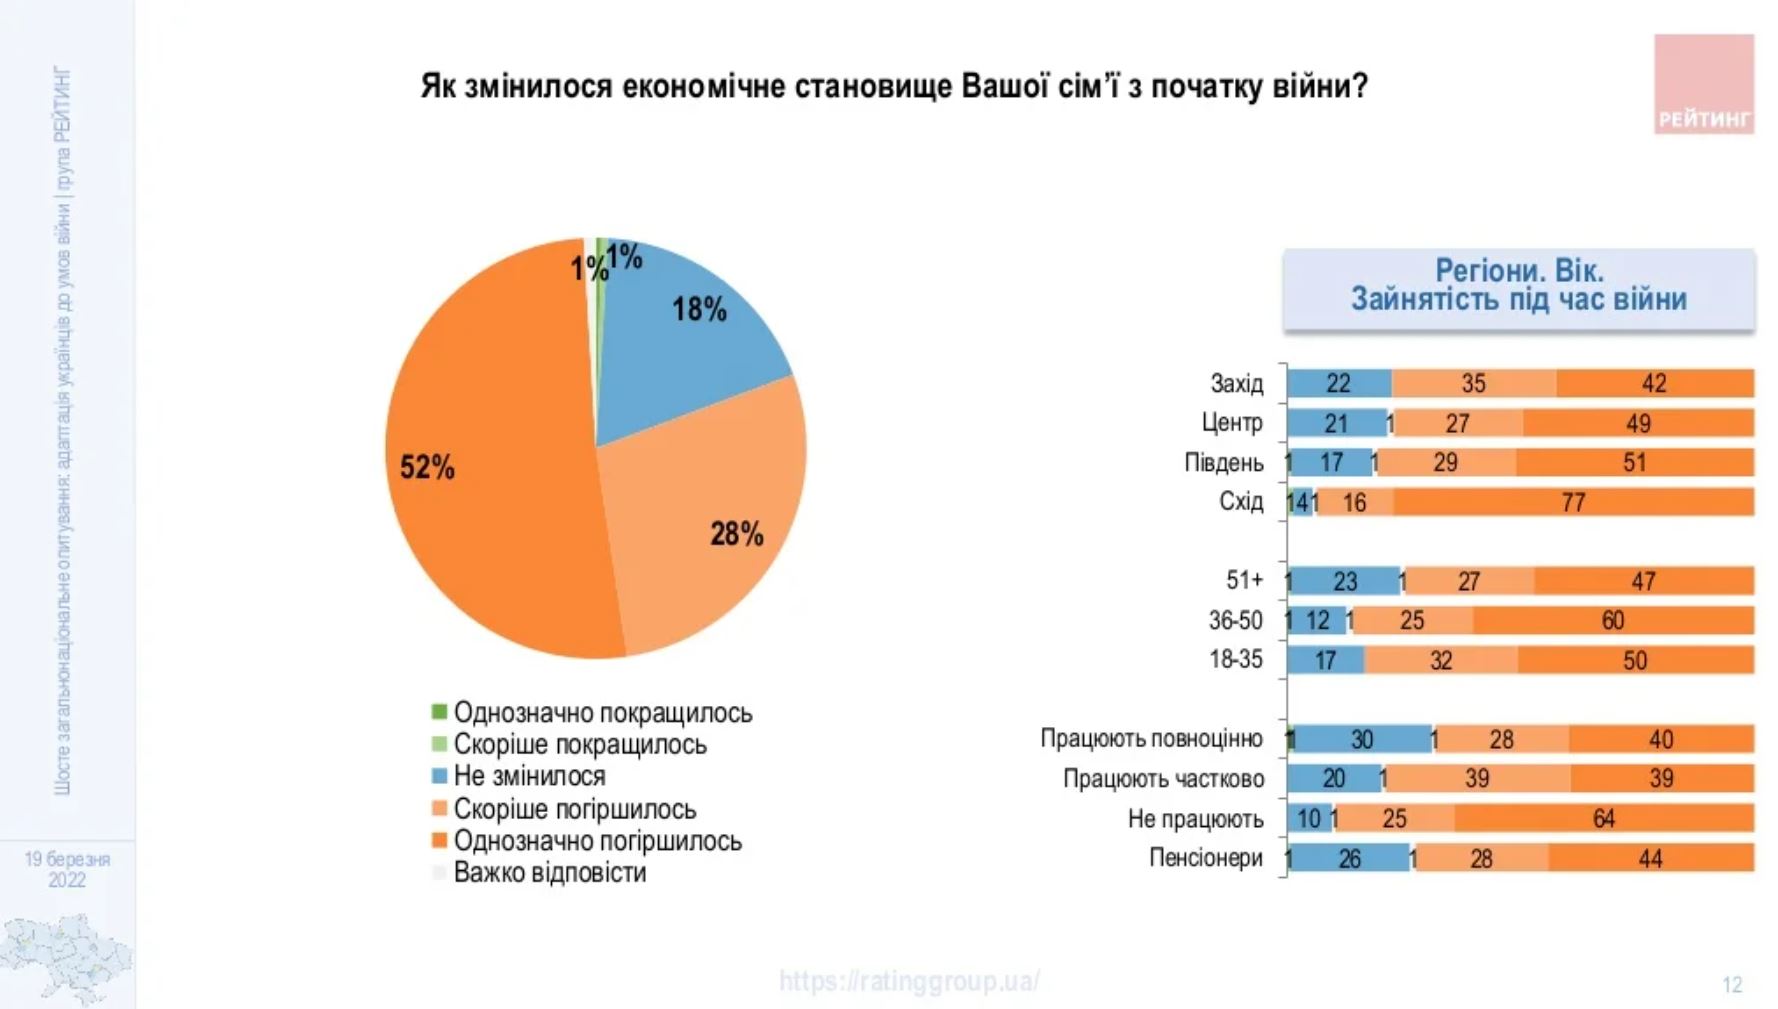 Full-scale Russian invasion: Sociologists spoke about the economic situation of Ukrainians